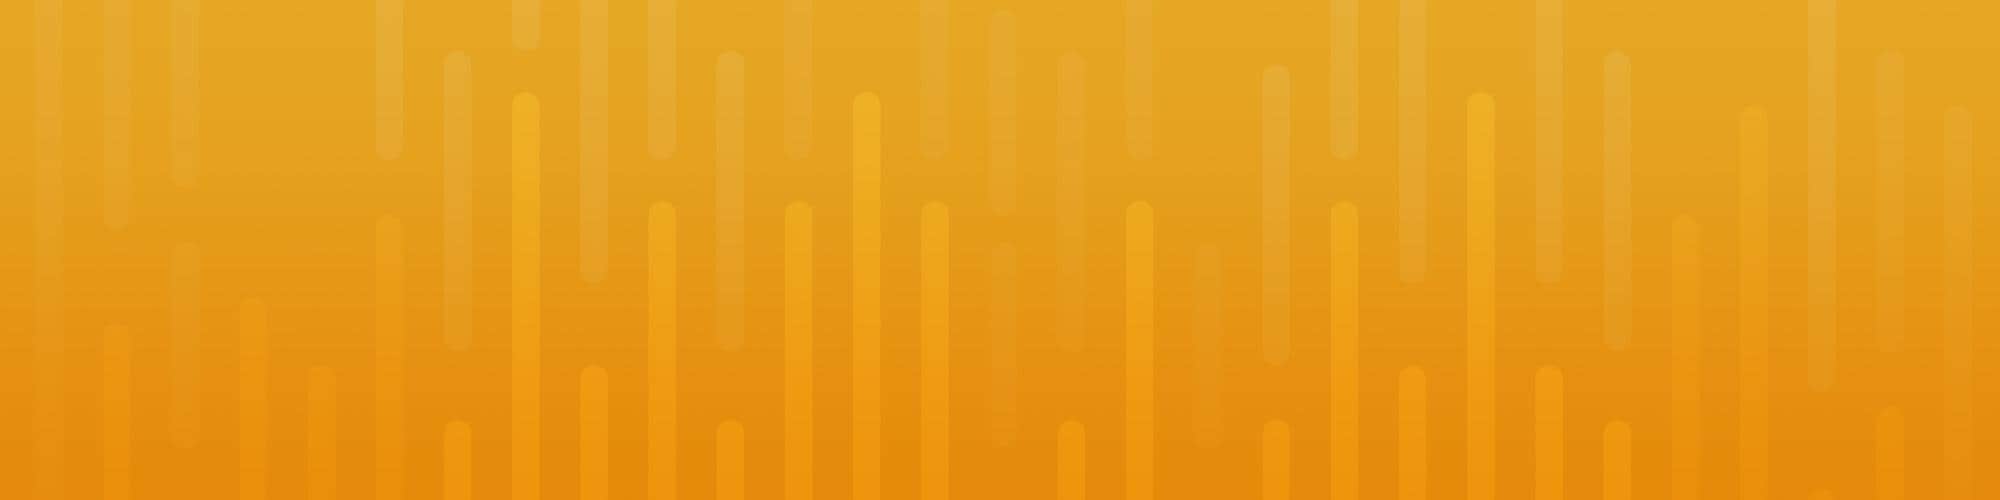 Yellow gradient with epiphany bar chart